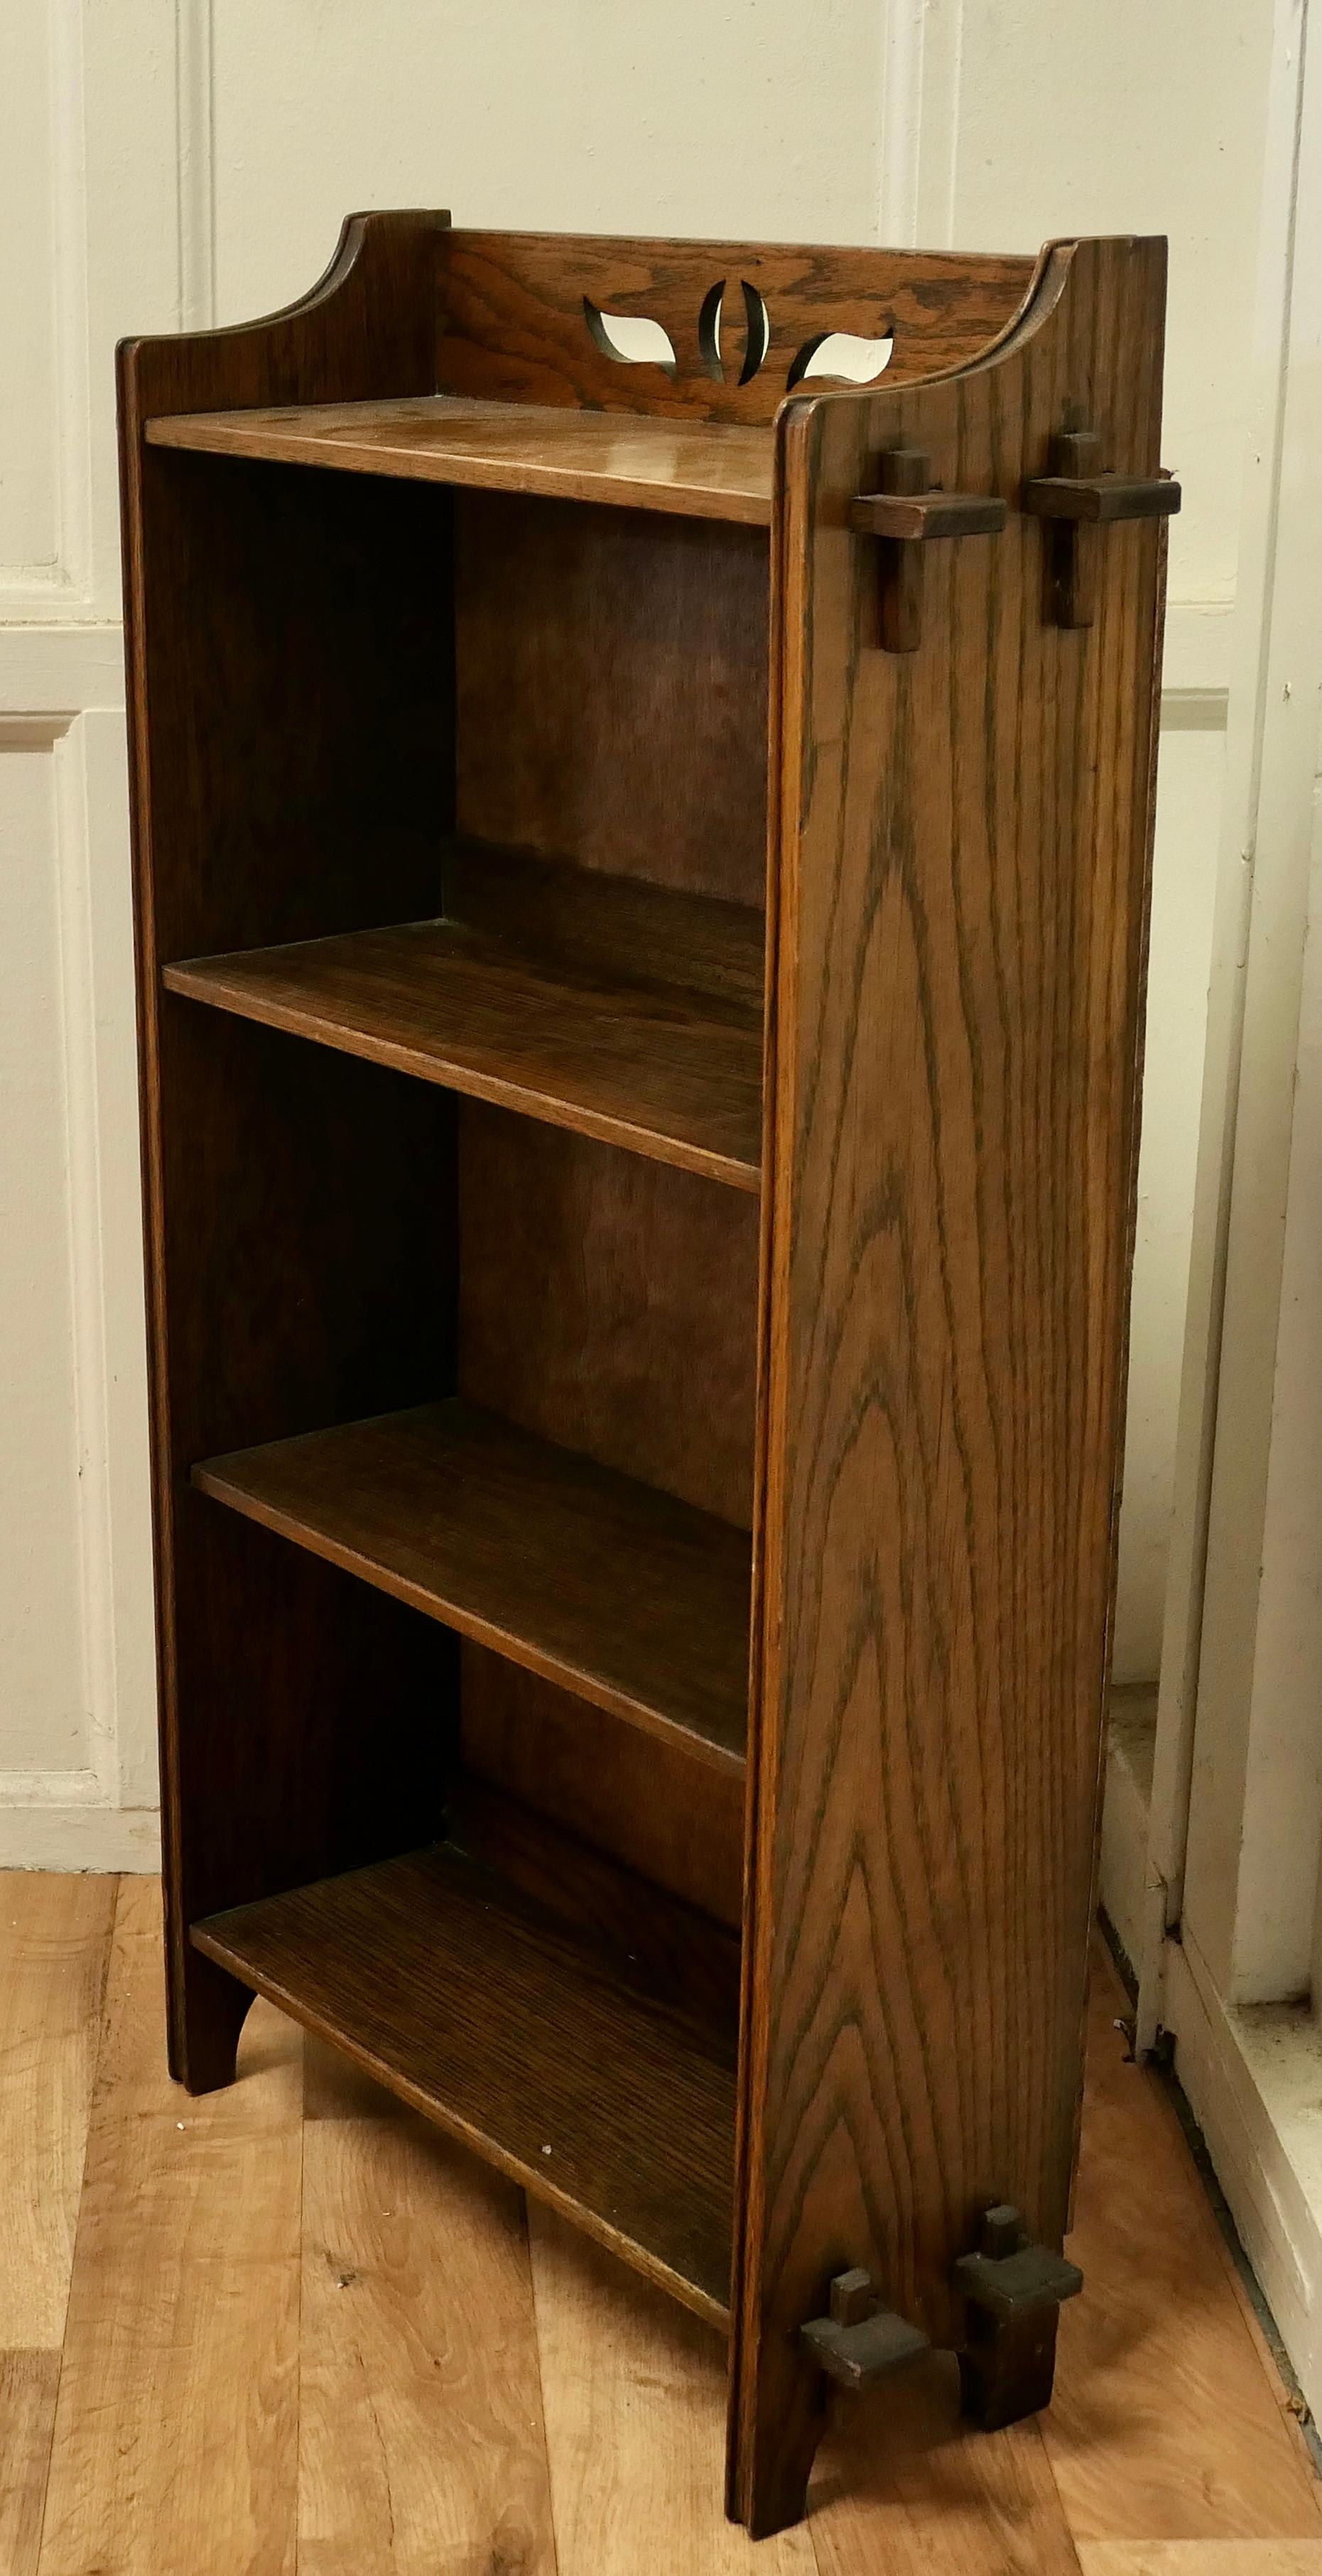 Arts and Crafts Open Front Oak bookcase.

This Oak bookcase has 4 shelves, the top has a neat pierced gallery and it stands on a pegged base
The bookcase is in good attractive condition and would work very well in your Living room, Office or